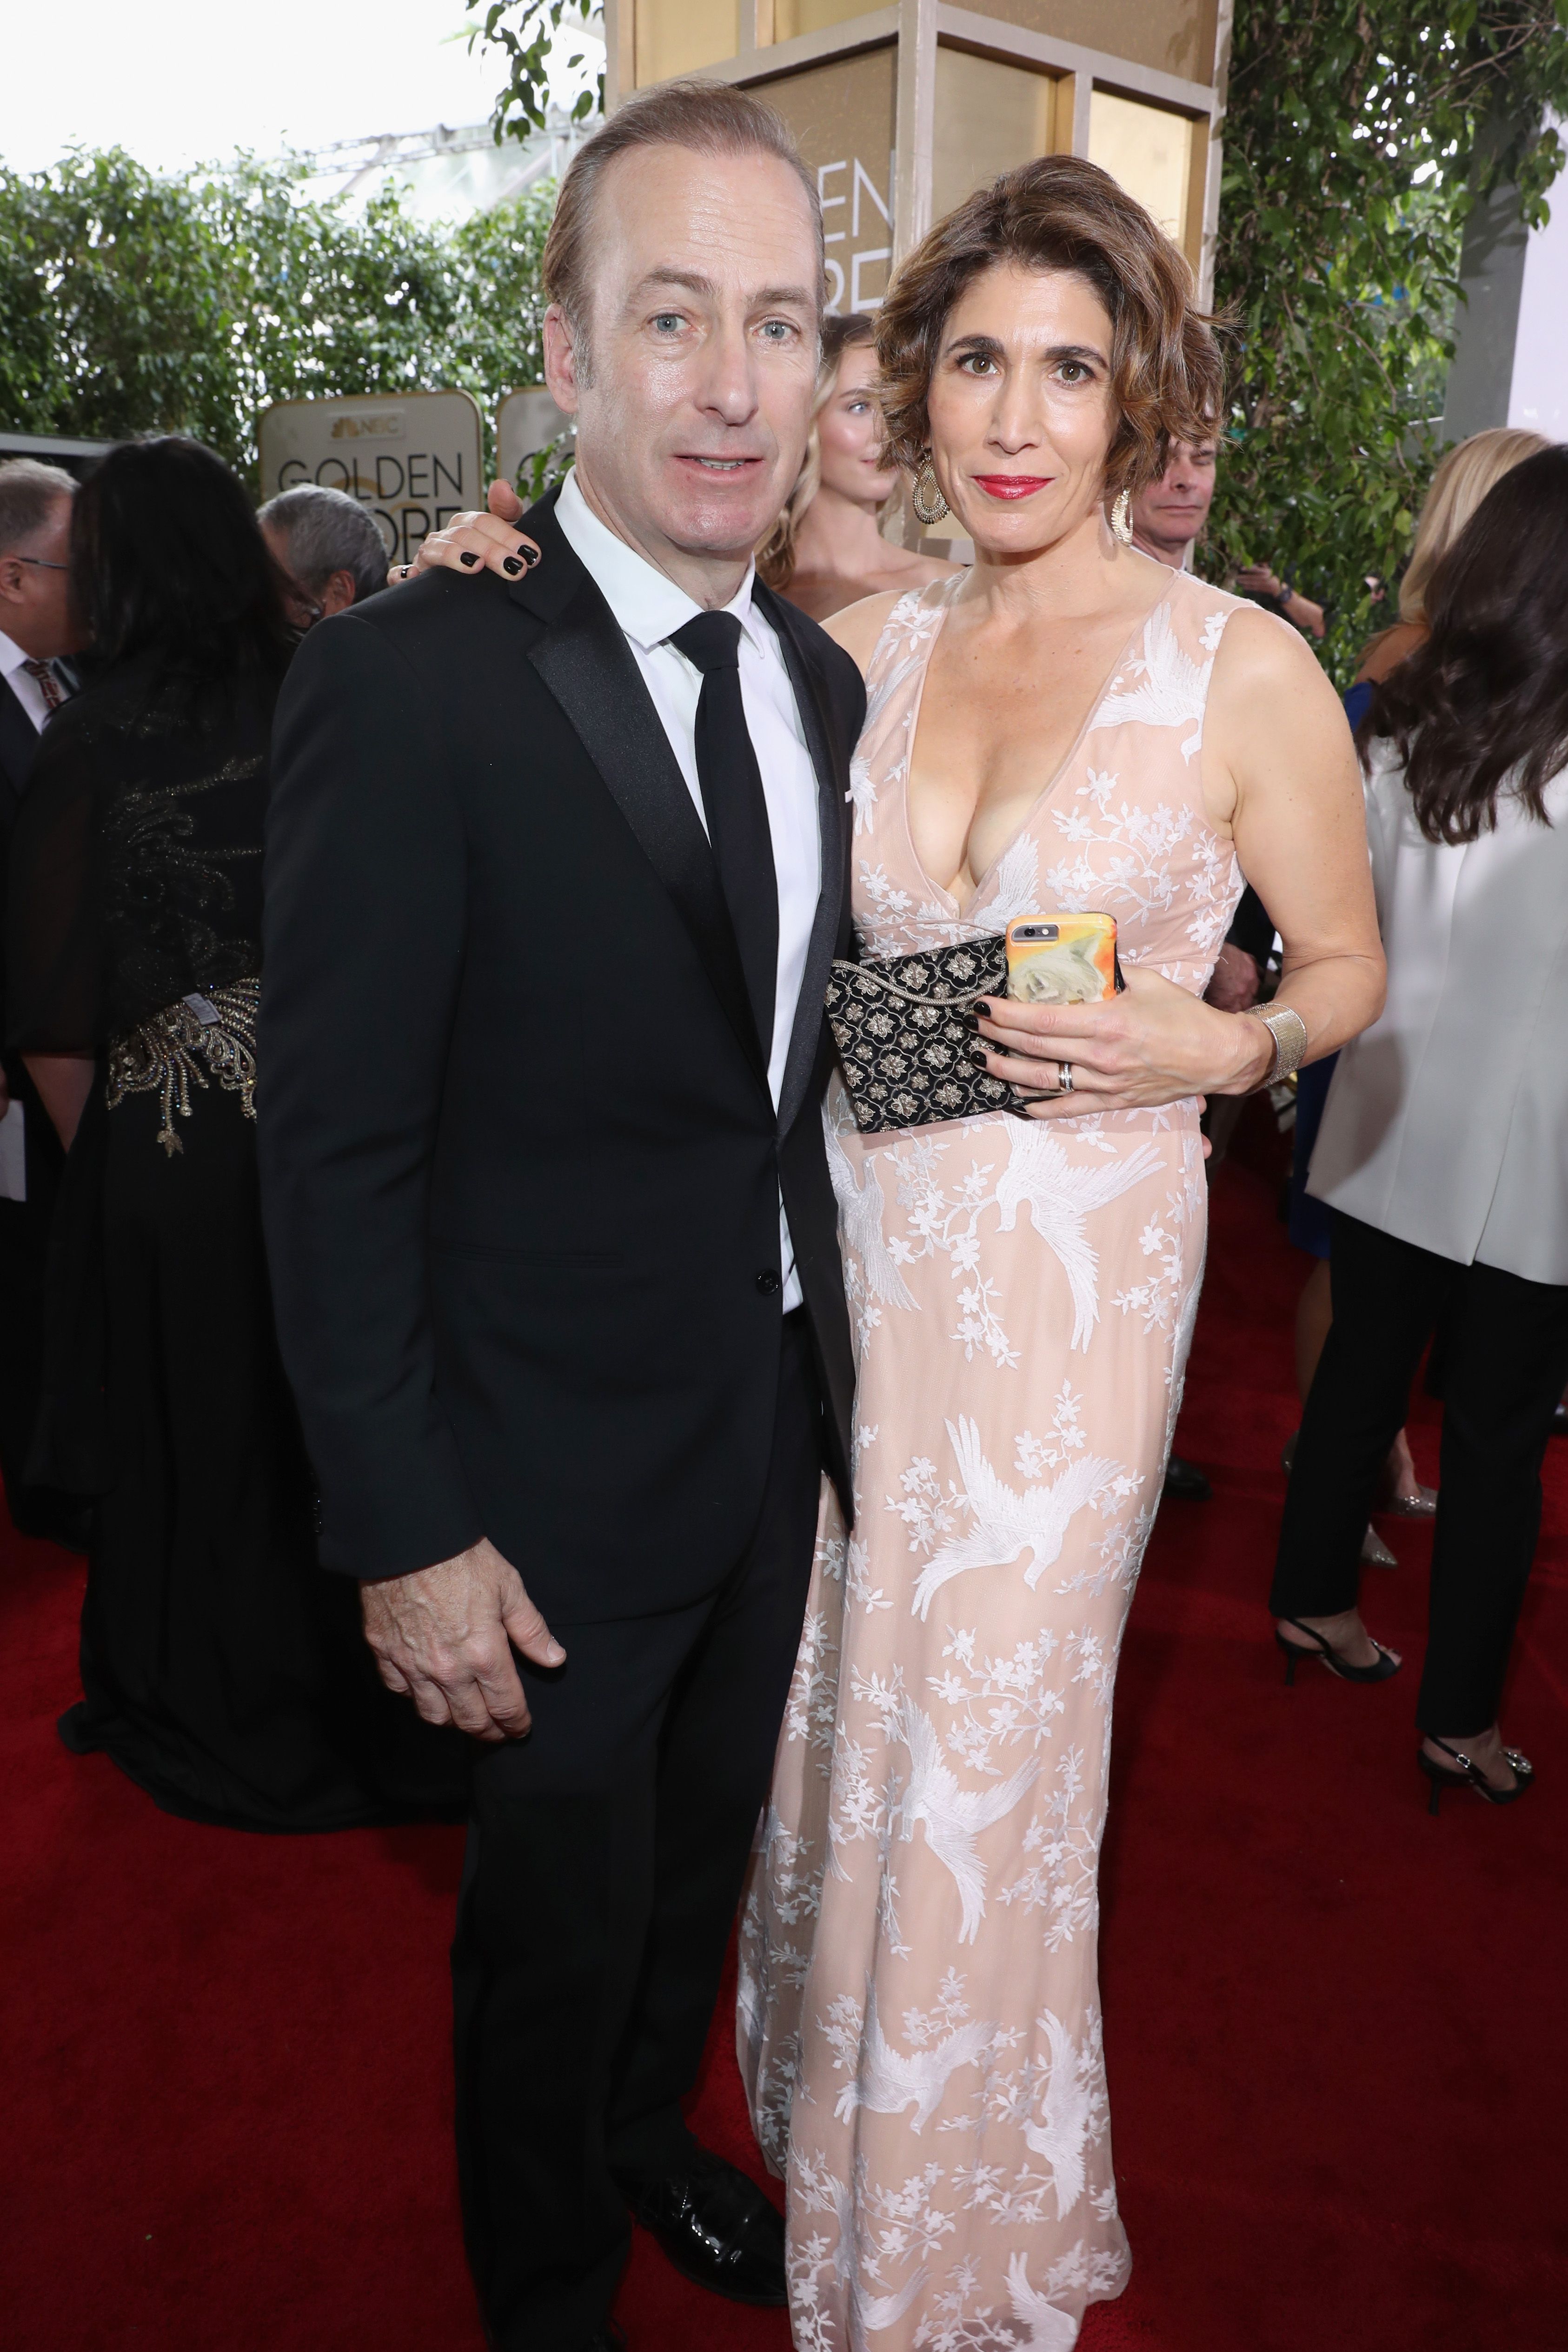 Bob Odenkirk and Naomi Yomtov during the 74th annual Golden Globe Awards at The Beverly Hilton Hotel on January 8, 2017, in Beverly Hills, California. | Source: Getty Images